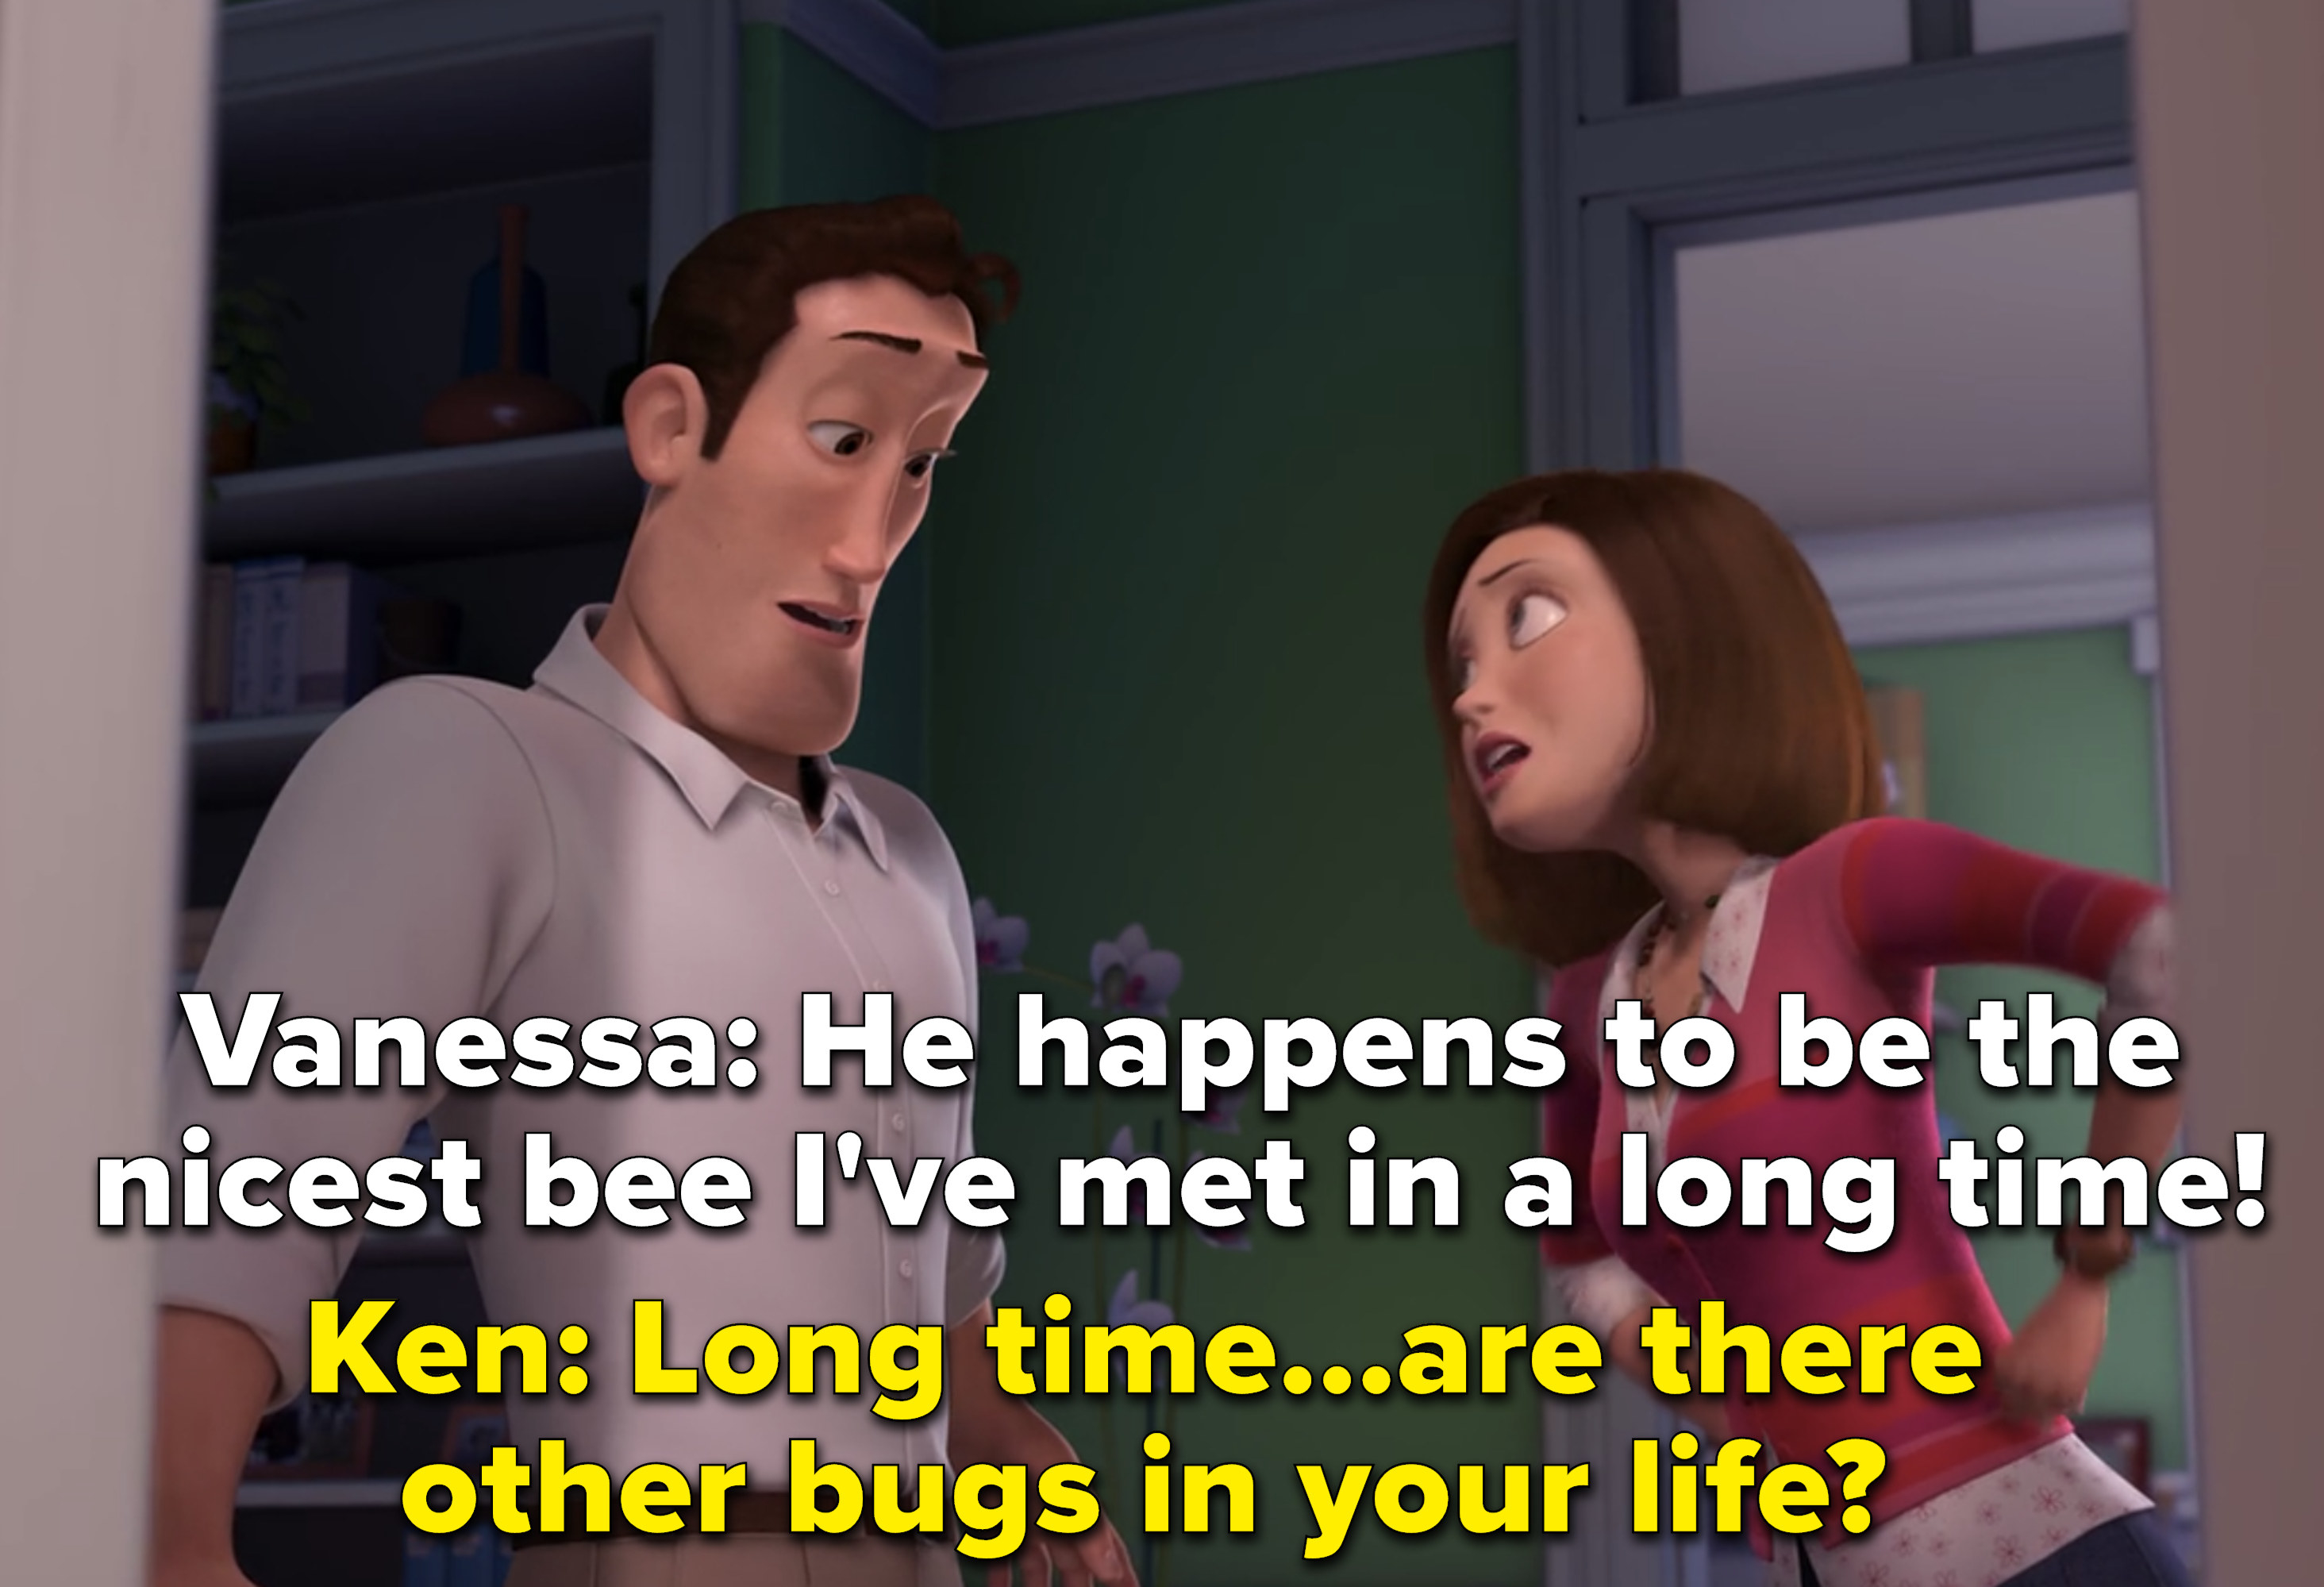 Every Bonkers Thing That Happens In Bee Movie